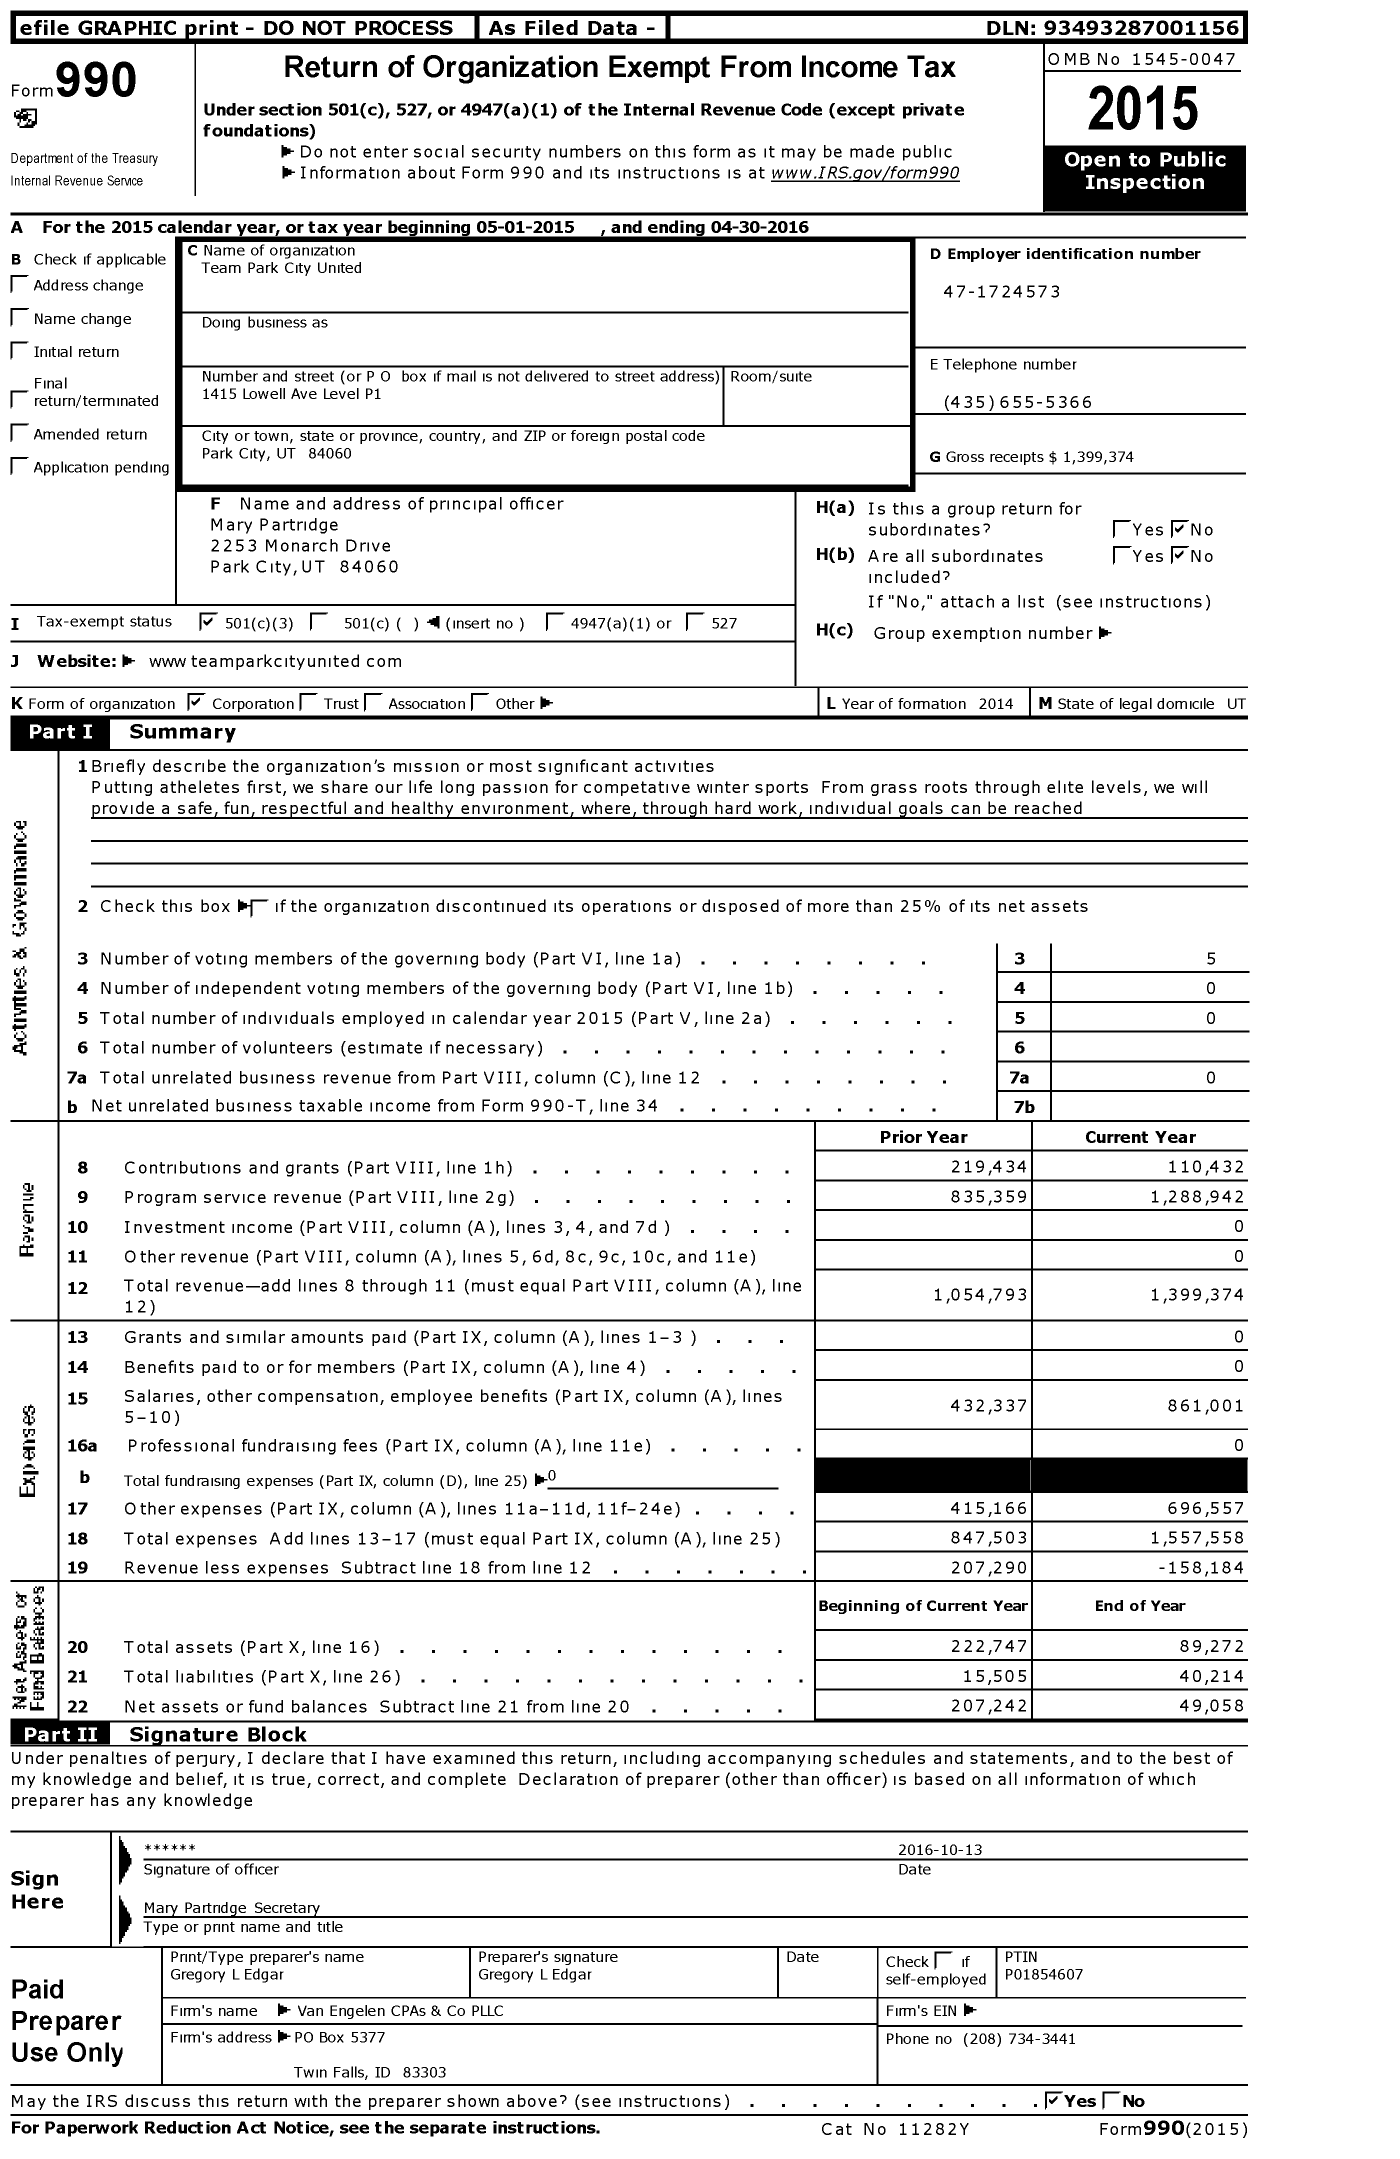 Image of first page of 2015 Form 990 for Team Park City United